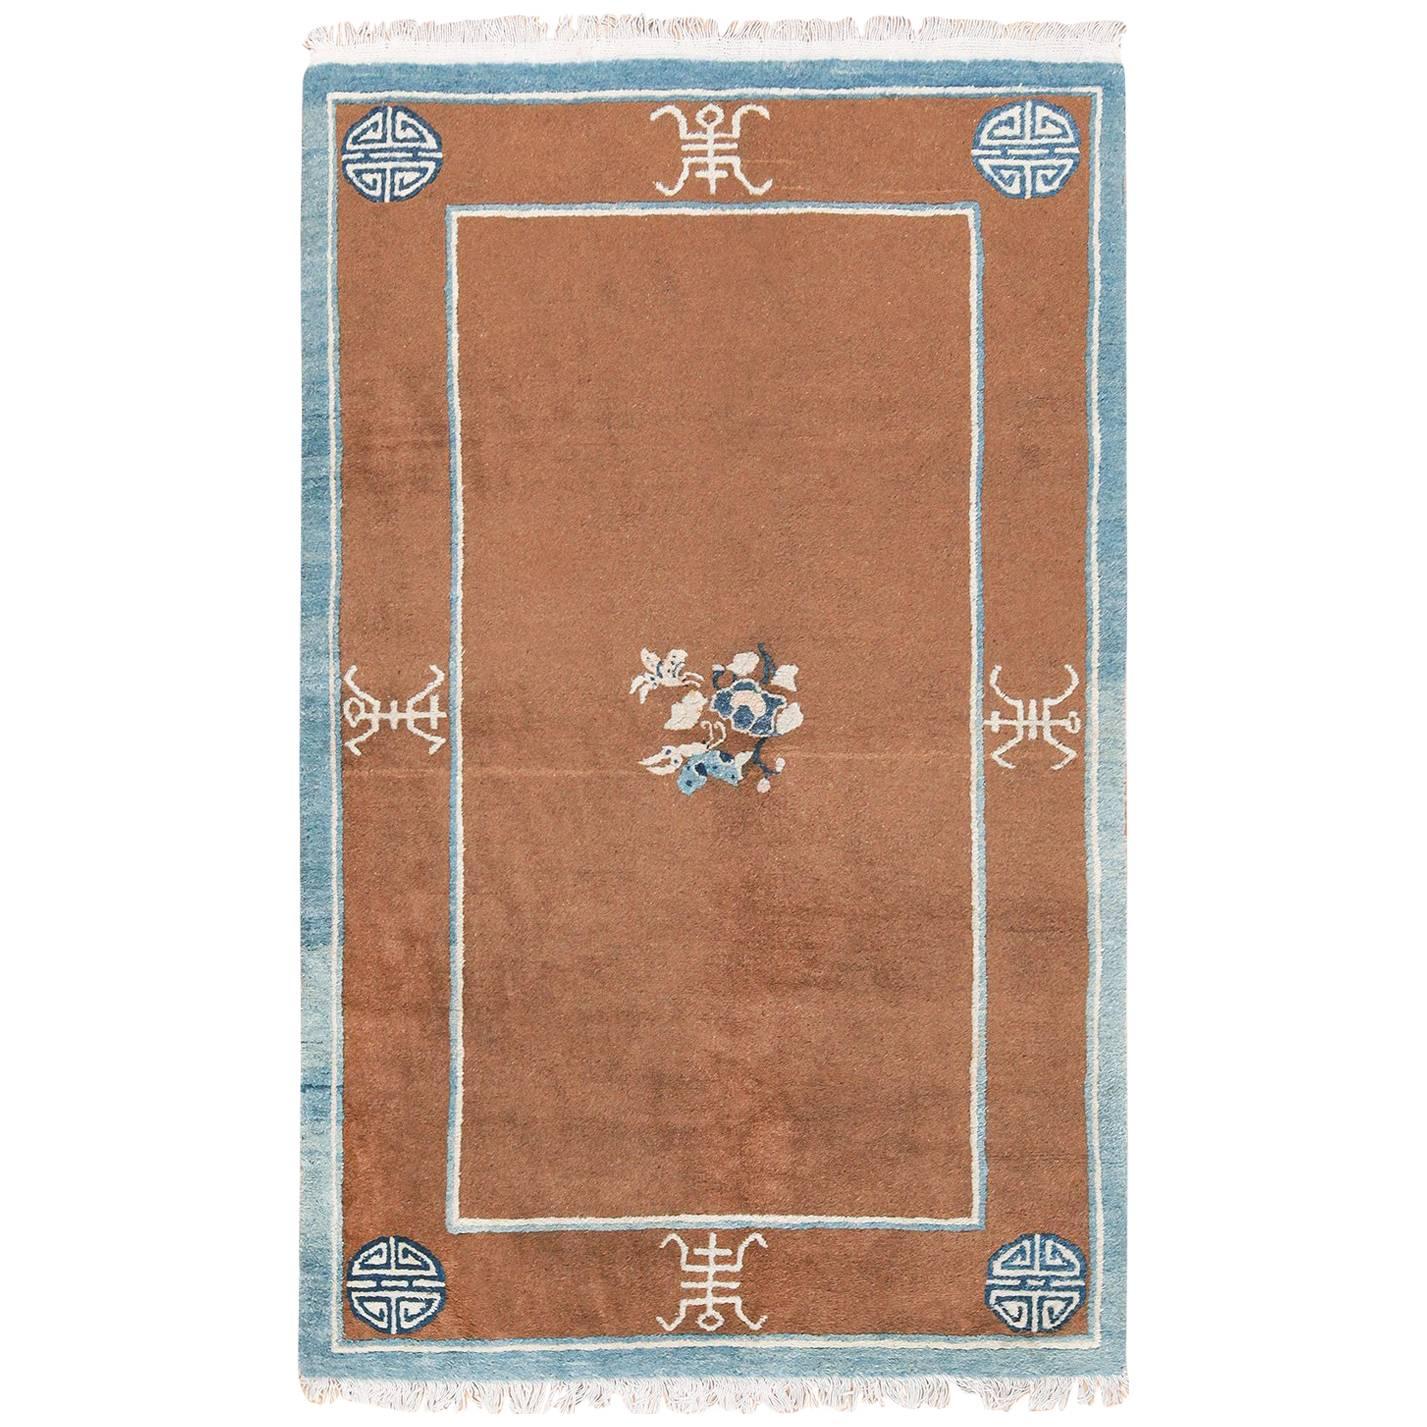 Small Size Brown and Blue Antique Chinese Rug. Size: 4 ft 2 in x 6 ft 9 in